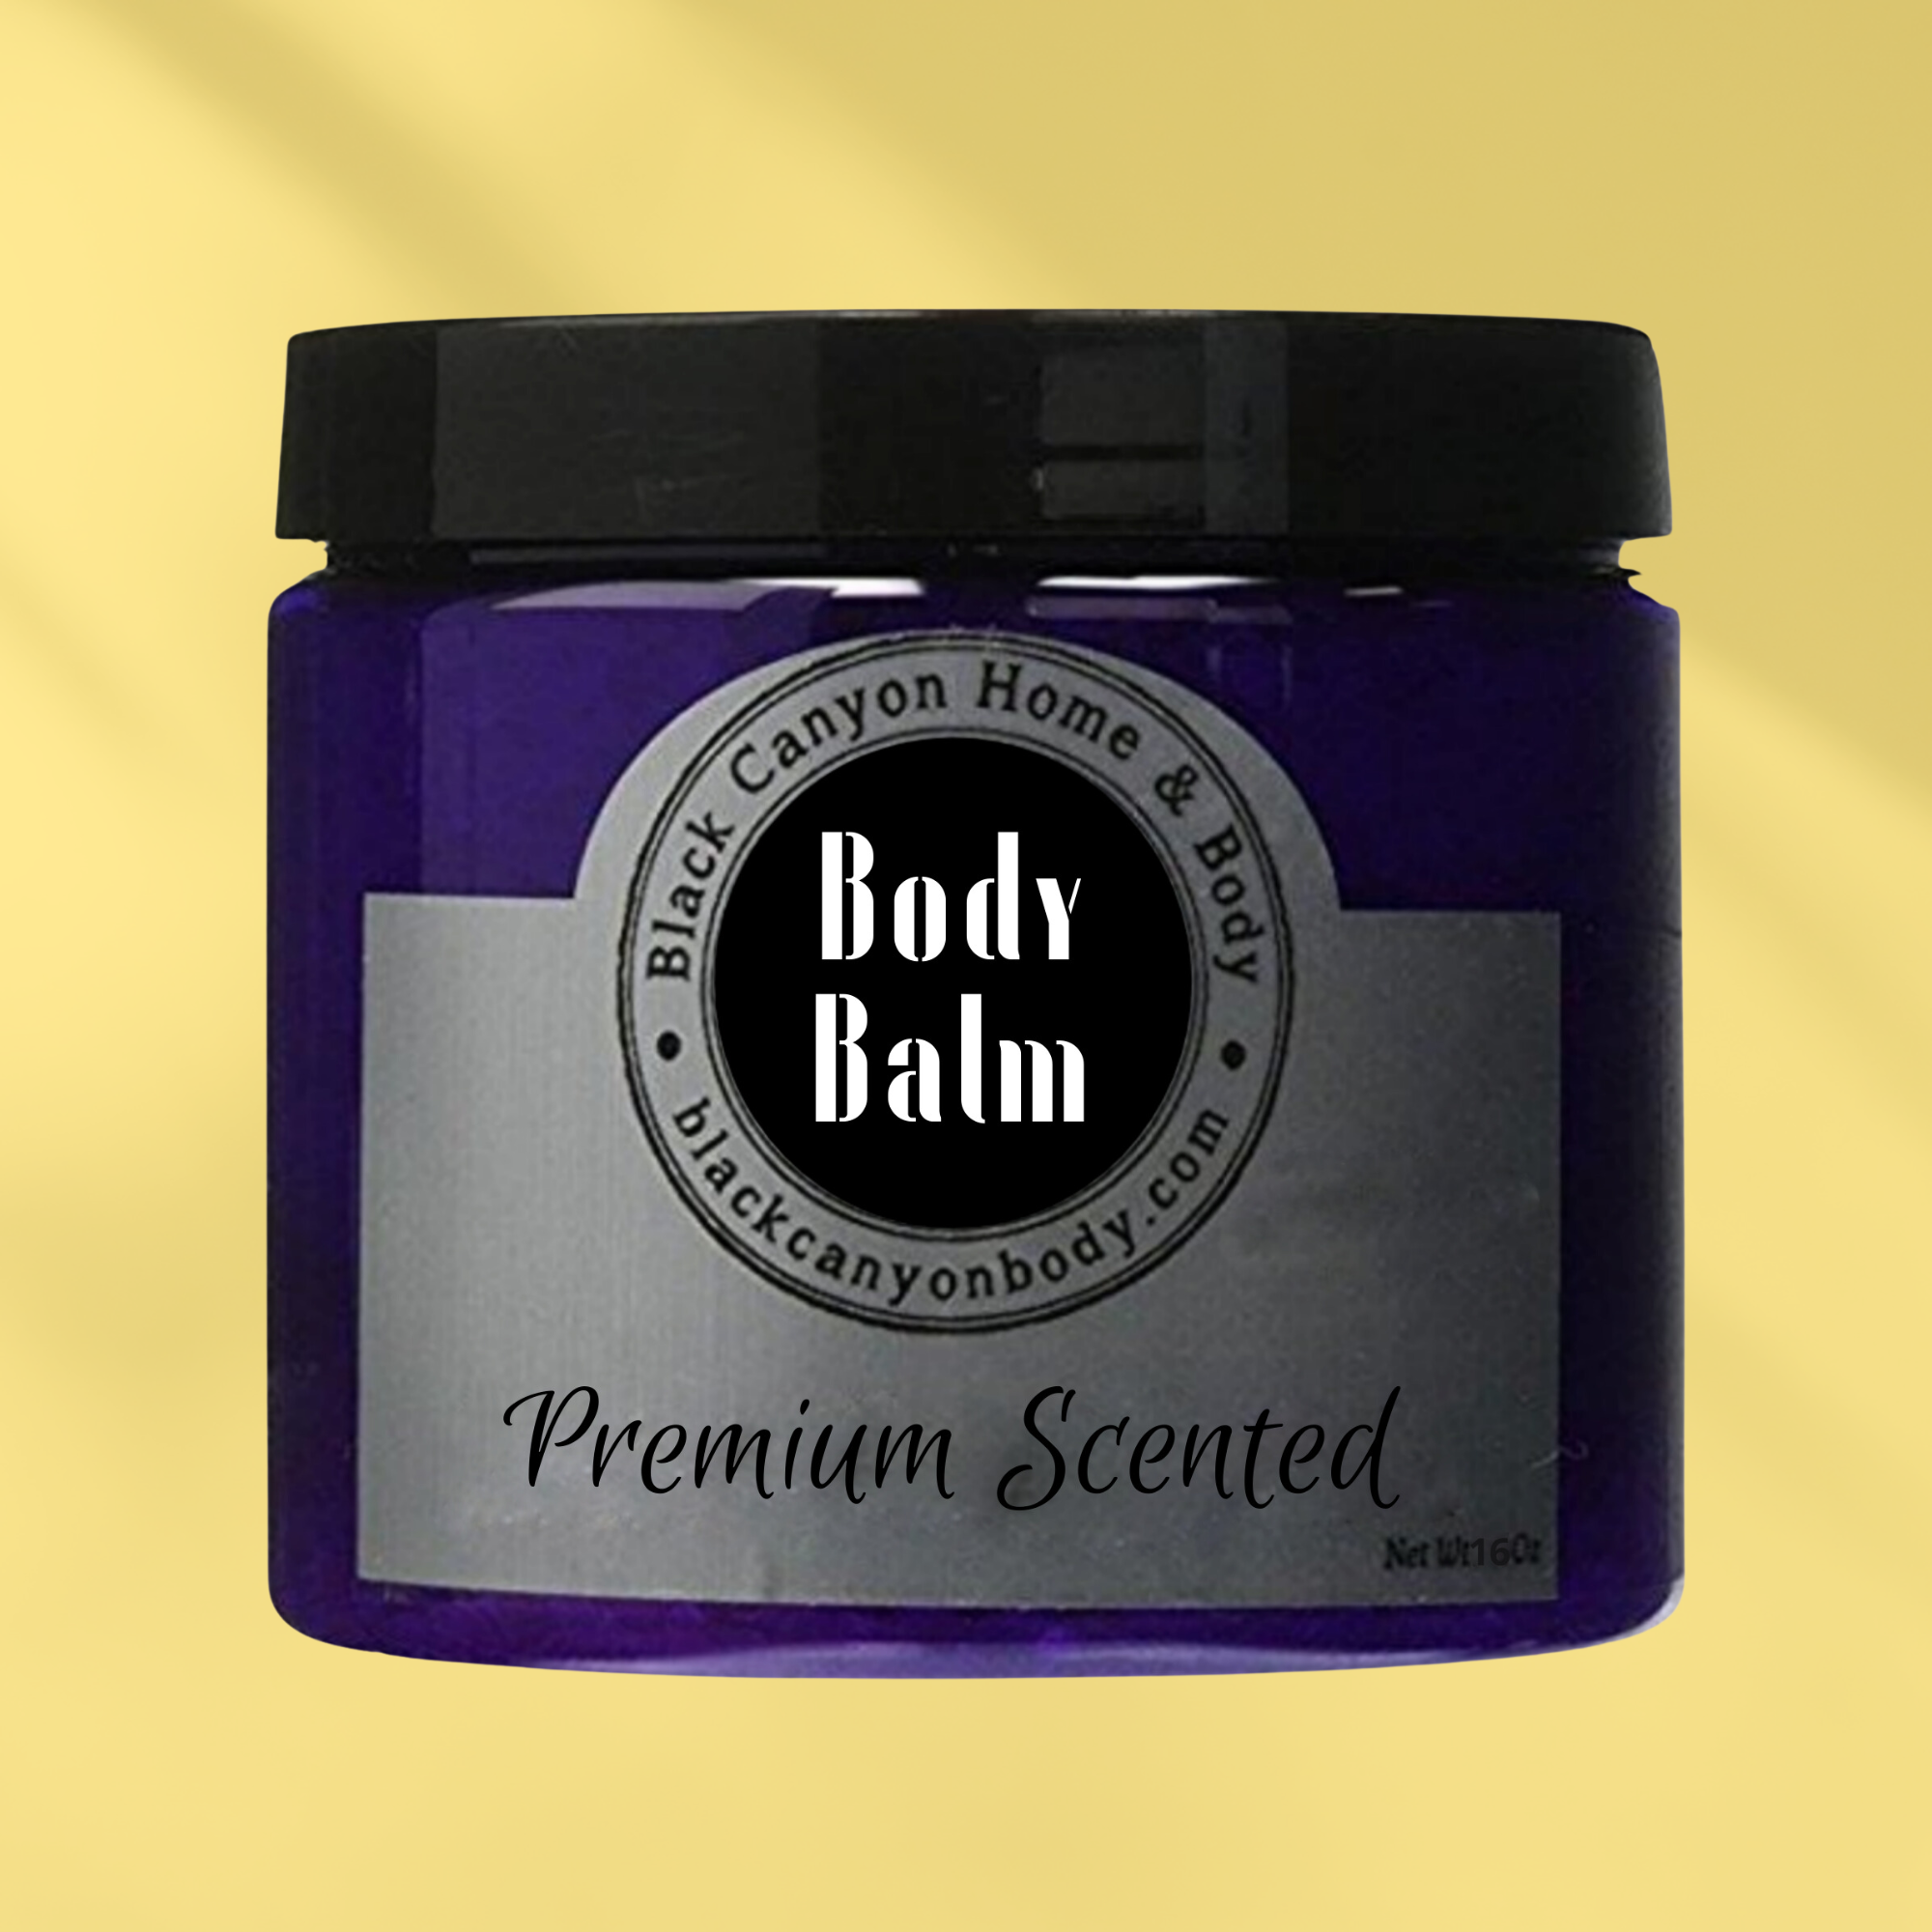 Black Canyon Moonlight Scented Natural Body Balm with Shea